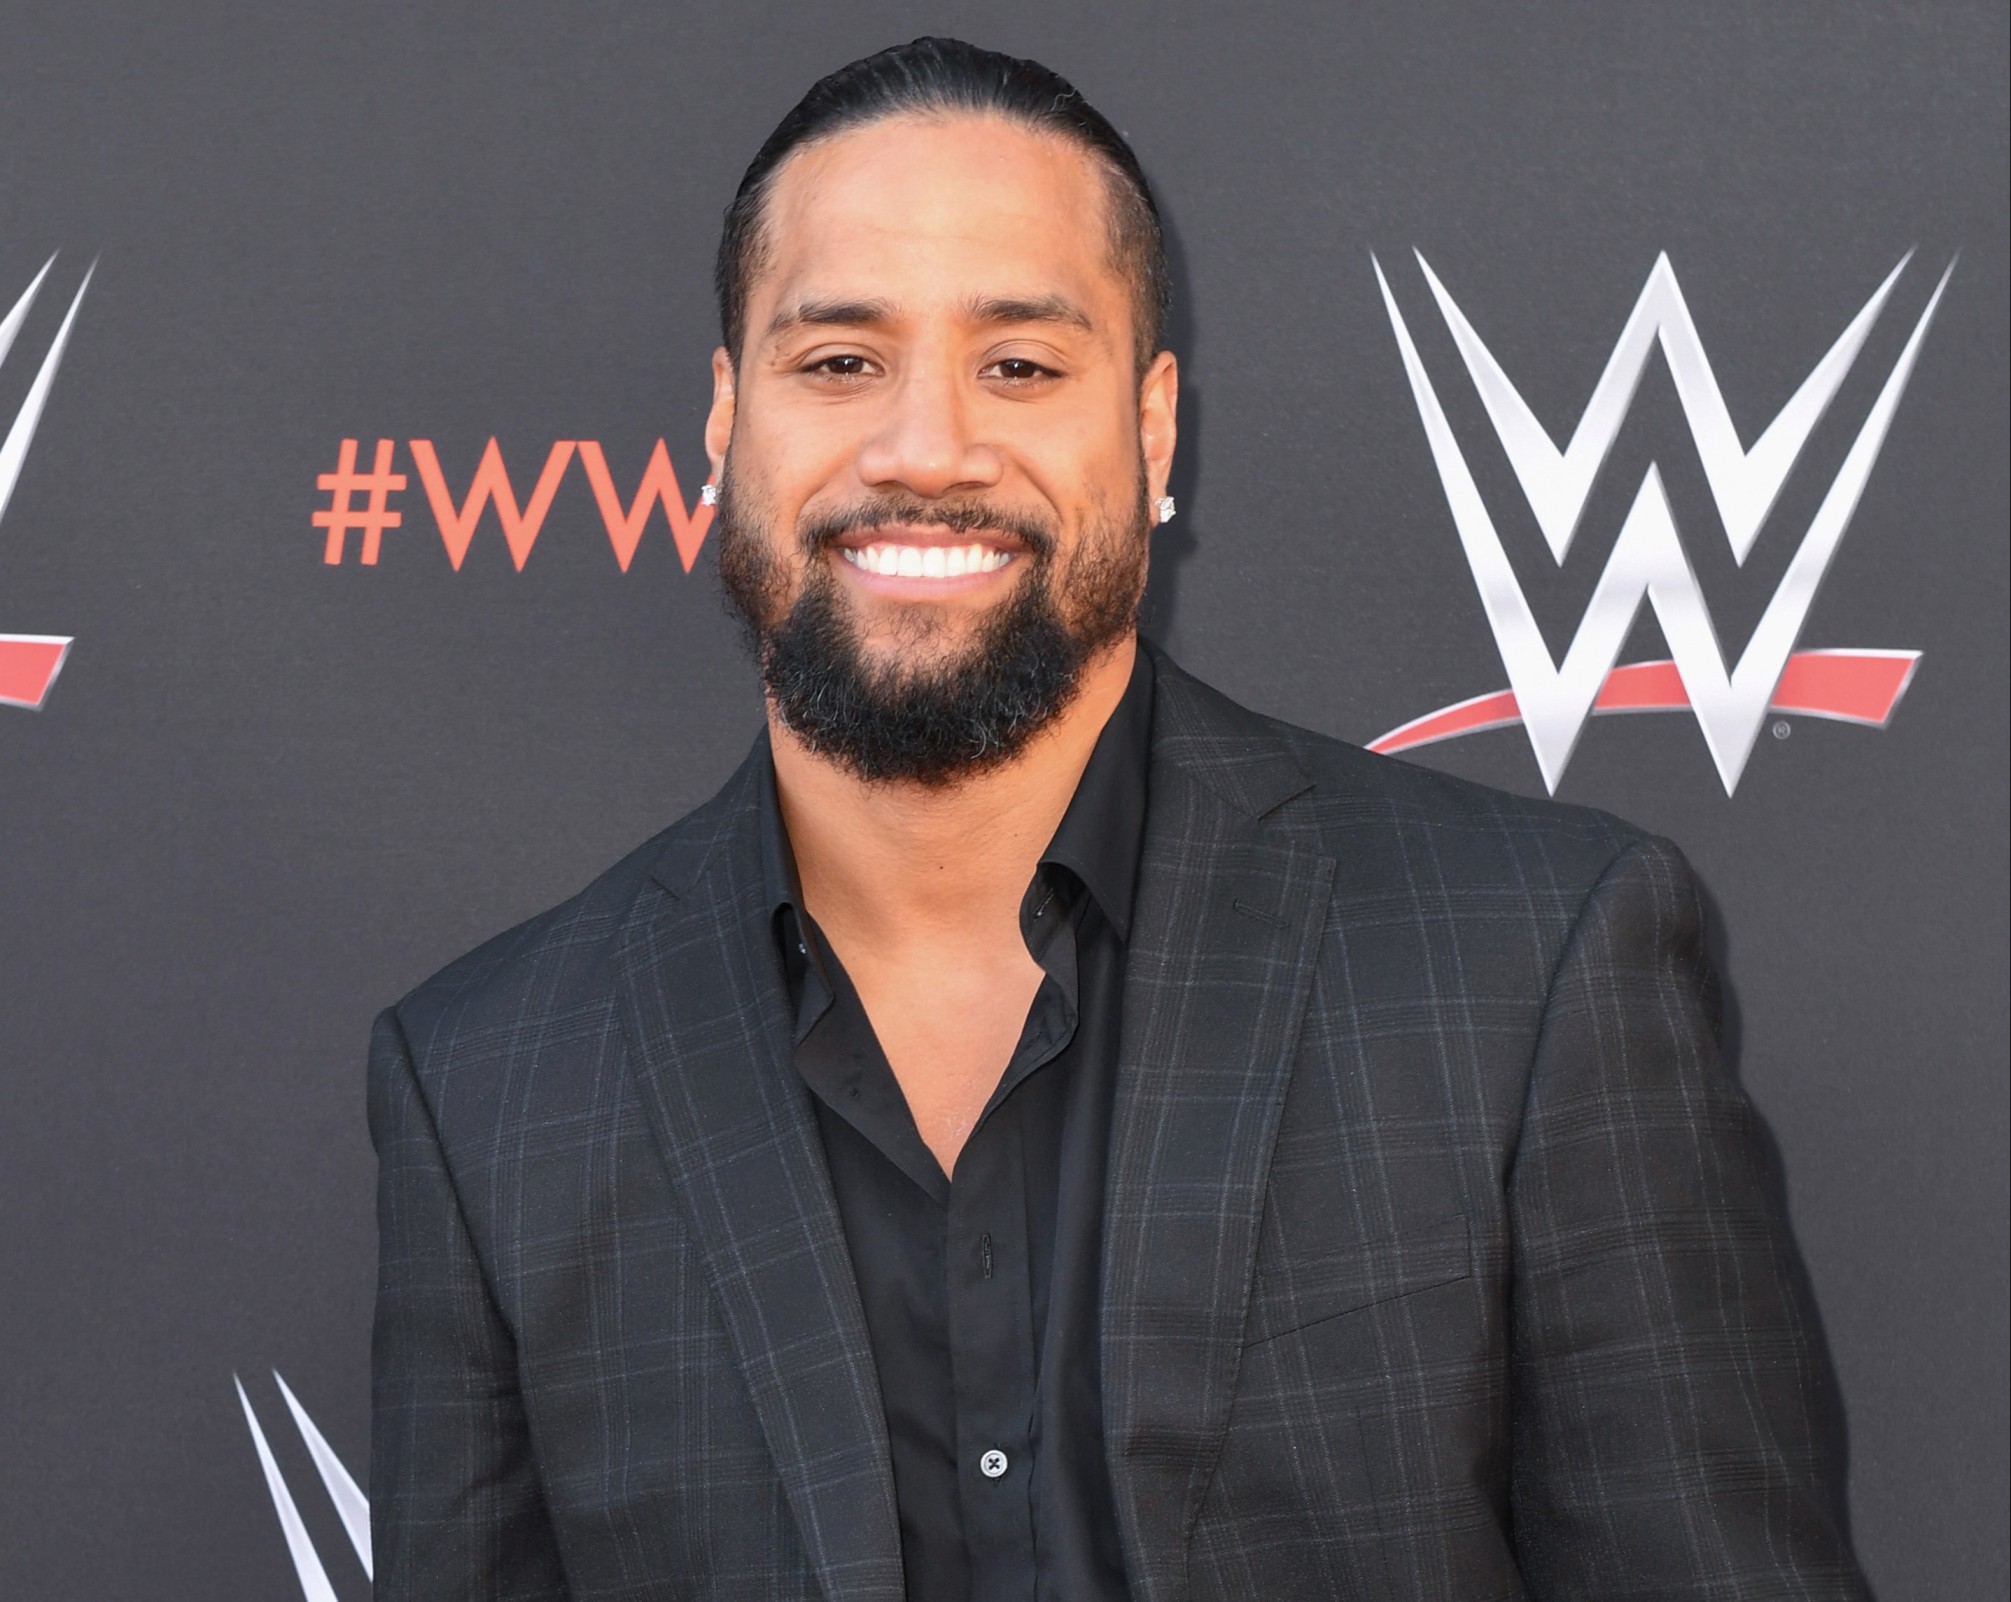 How tall is Jimmy Uso?